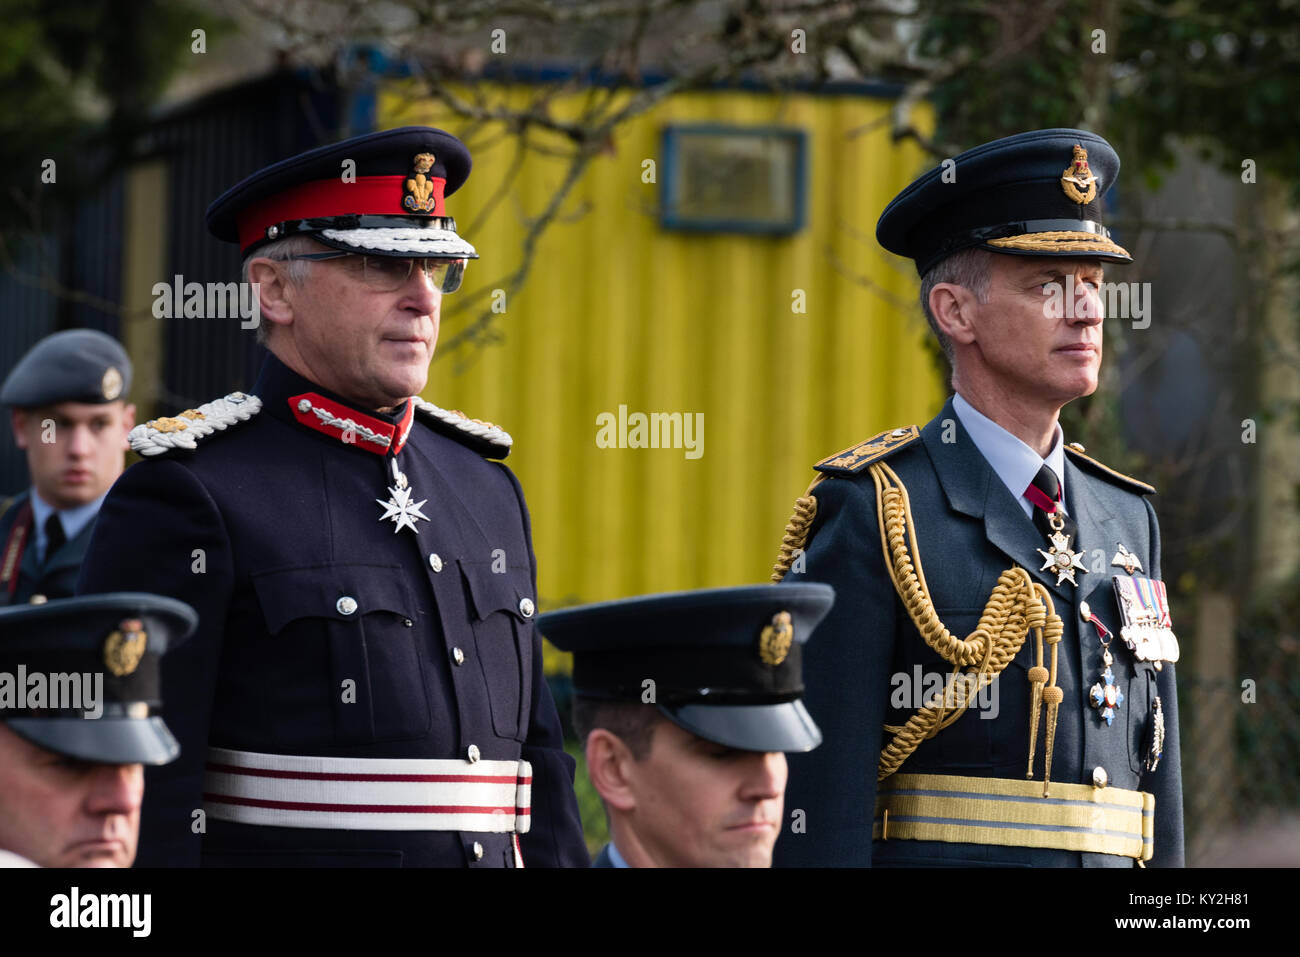 Llanystumdwy, Gwynedd, UK. 12th Jan, 2018. UK. the Lord Lieutenant of Gwynedd, Gwynedd, Edmund Bailey (L) and Chief of the Air Staff Air Chief Marshal Sir Stephen Hillier (R) at the commemoration of Prime Minister David Lloyd George's 1917 decision to create the world's first independent Air Force in 1918. Credit: Michael Gibson/Alamy Live News Stock Photo